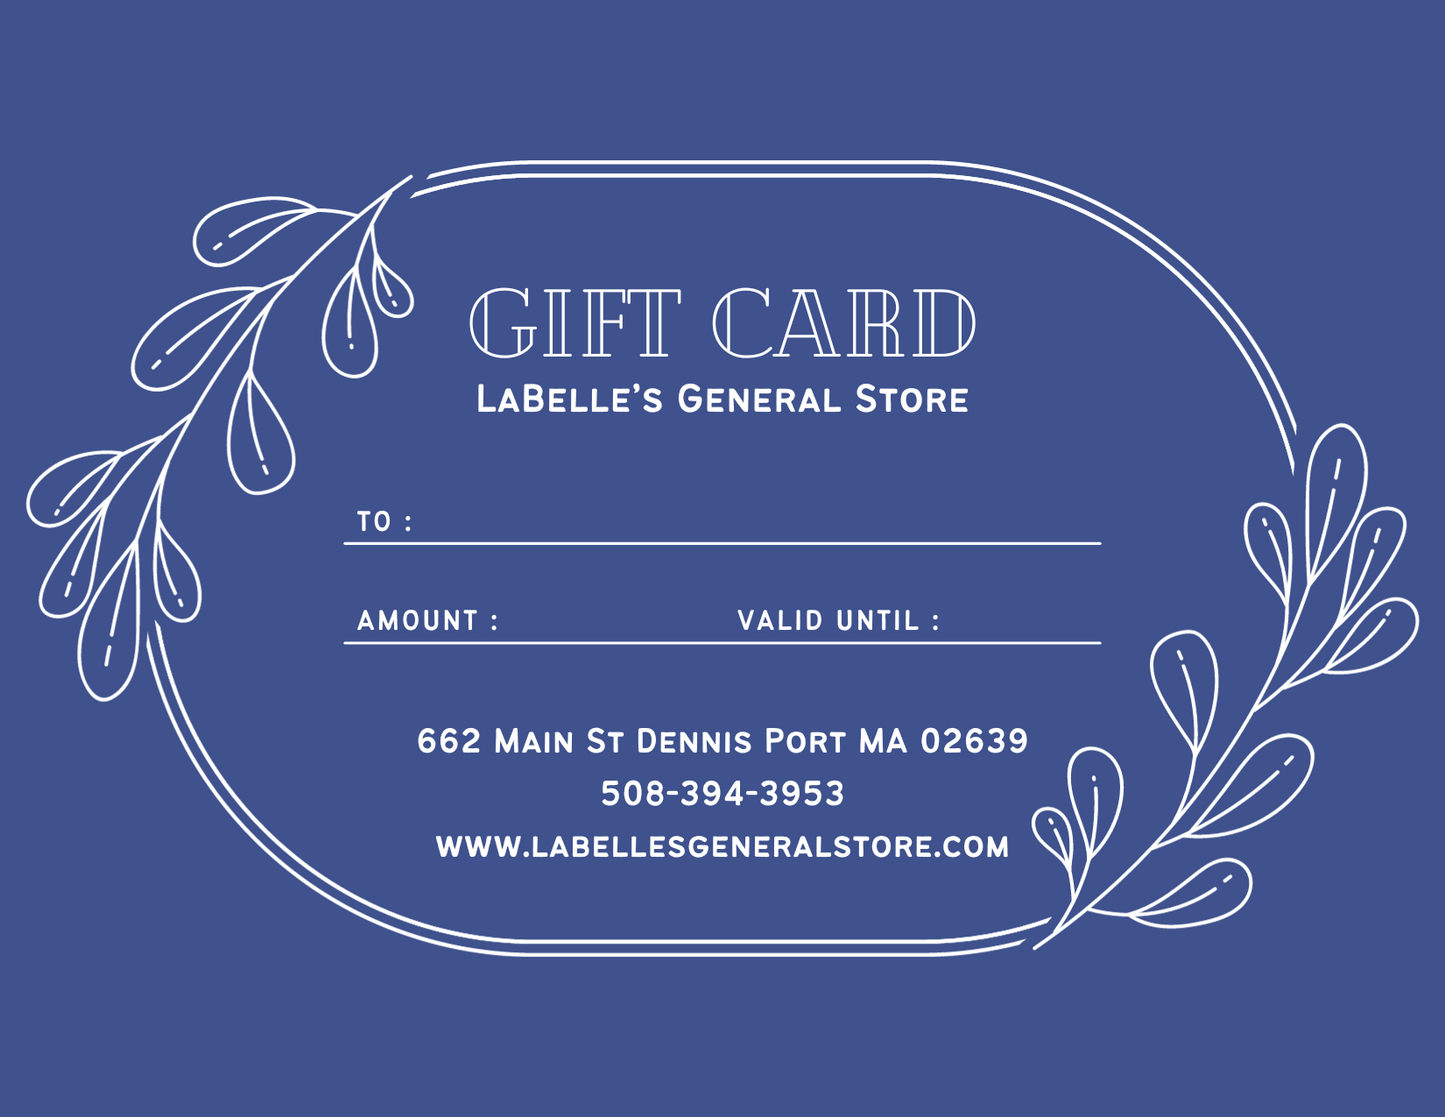 LaBelle’s General Store - Gift Card